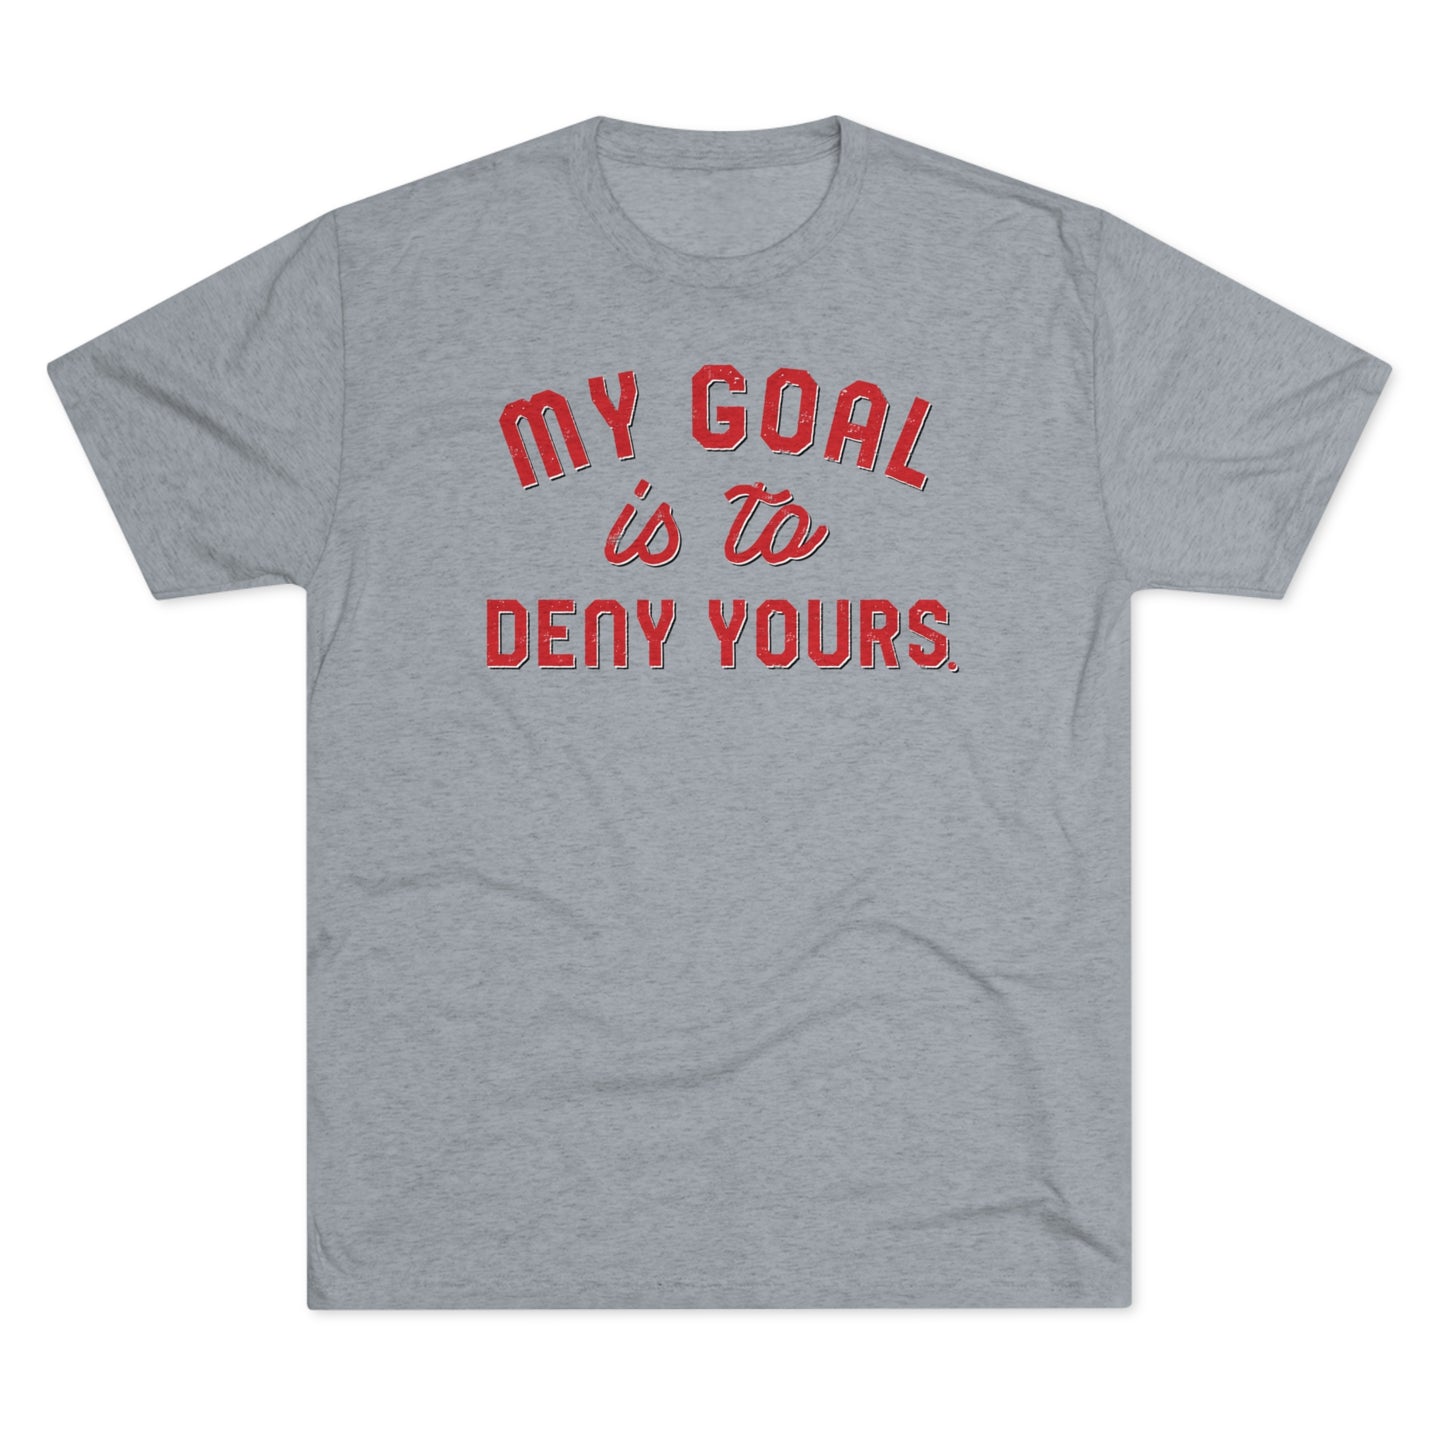 MY GOAL IS TO DENY YOURS-Unisex Tri-Blend Crew Tee